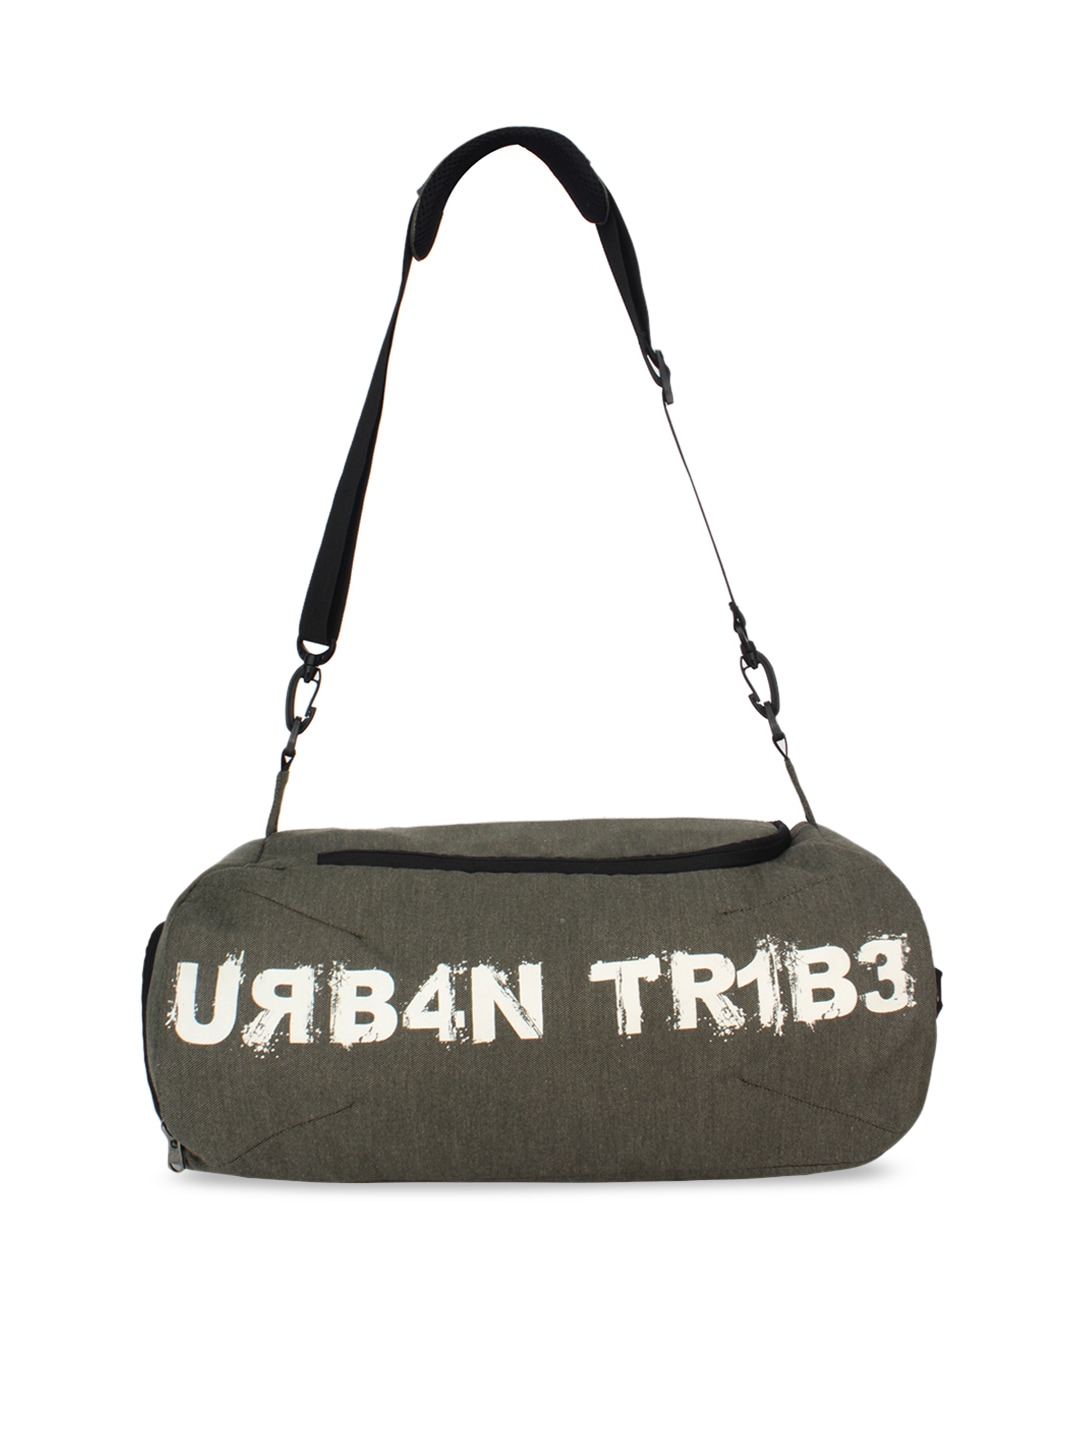 URBAN TRIBE Unisex Olive Green Duffle Bag Price in India